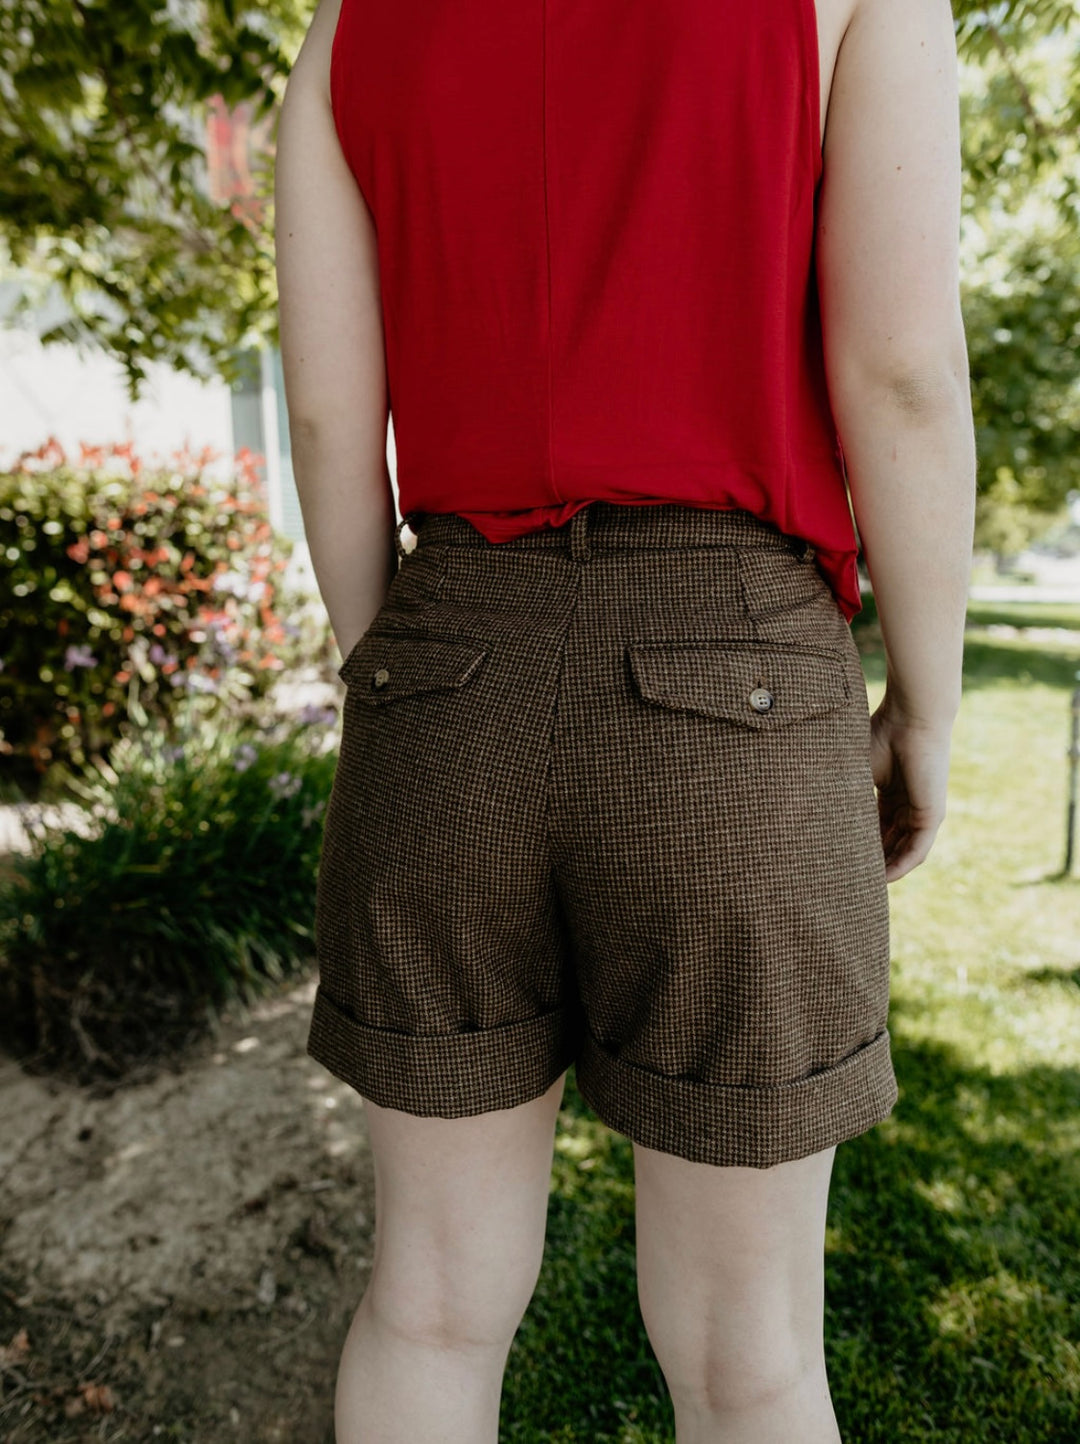 Outlaw Trail Shorts